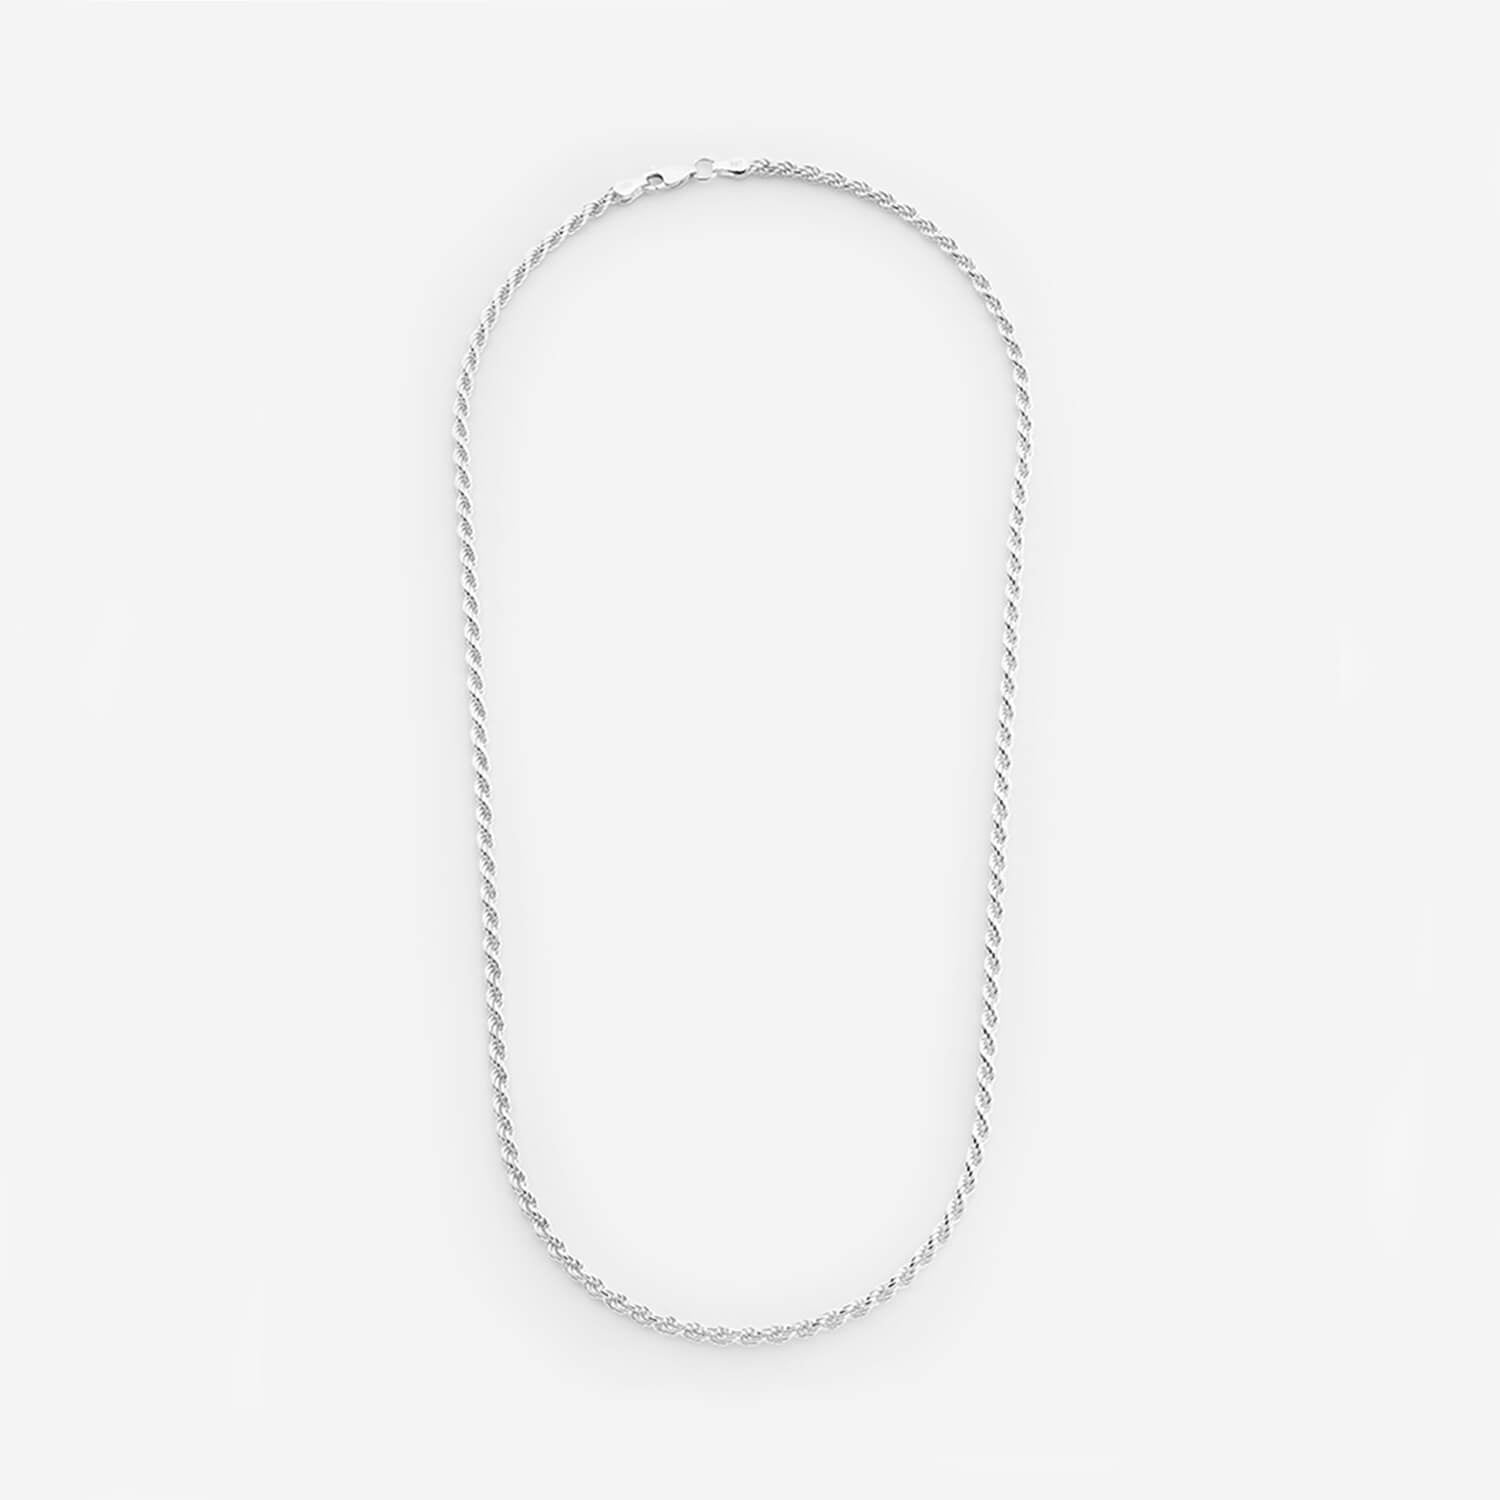 886 Royal Mint Necklaces 14 inch 886 Rope Chain in Sterling Silver